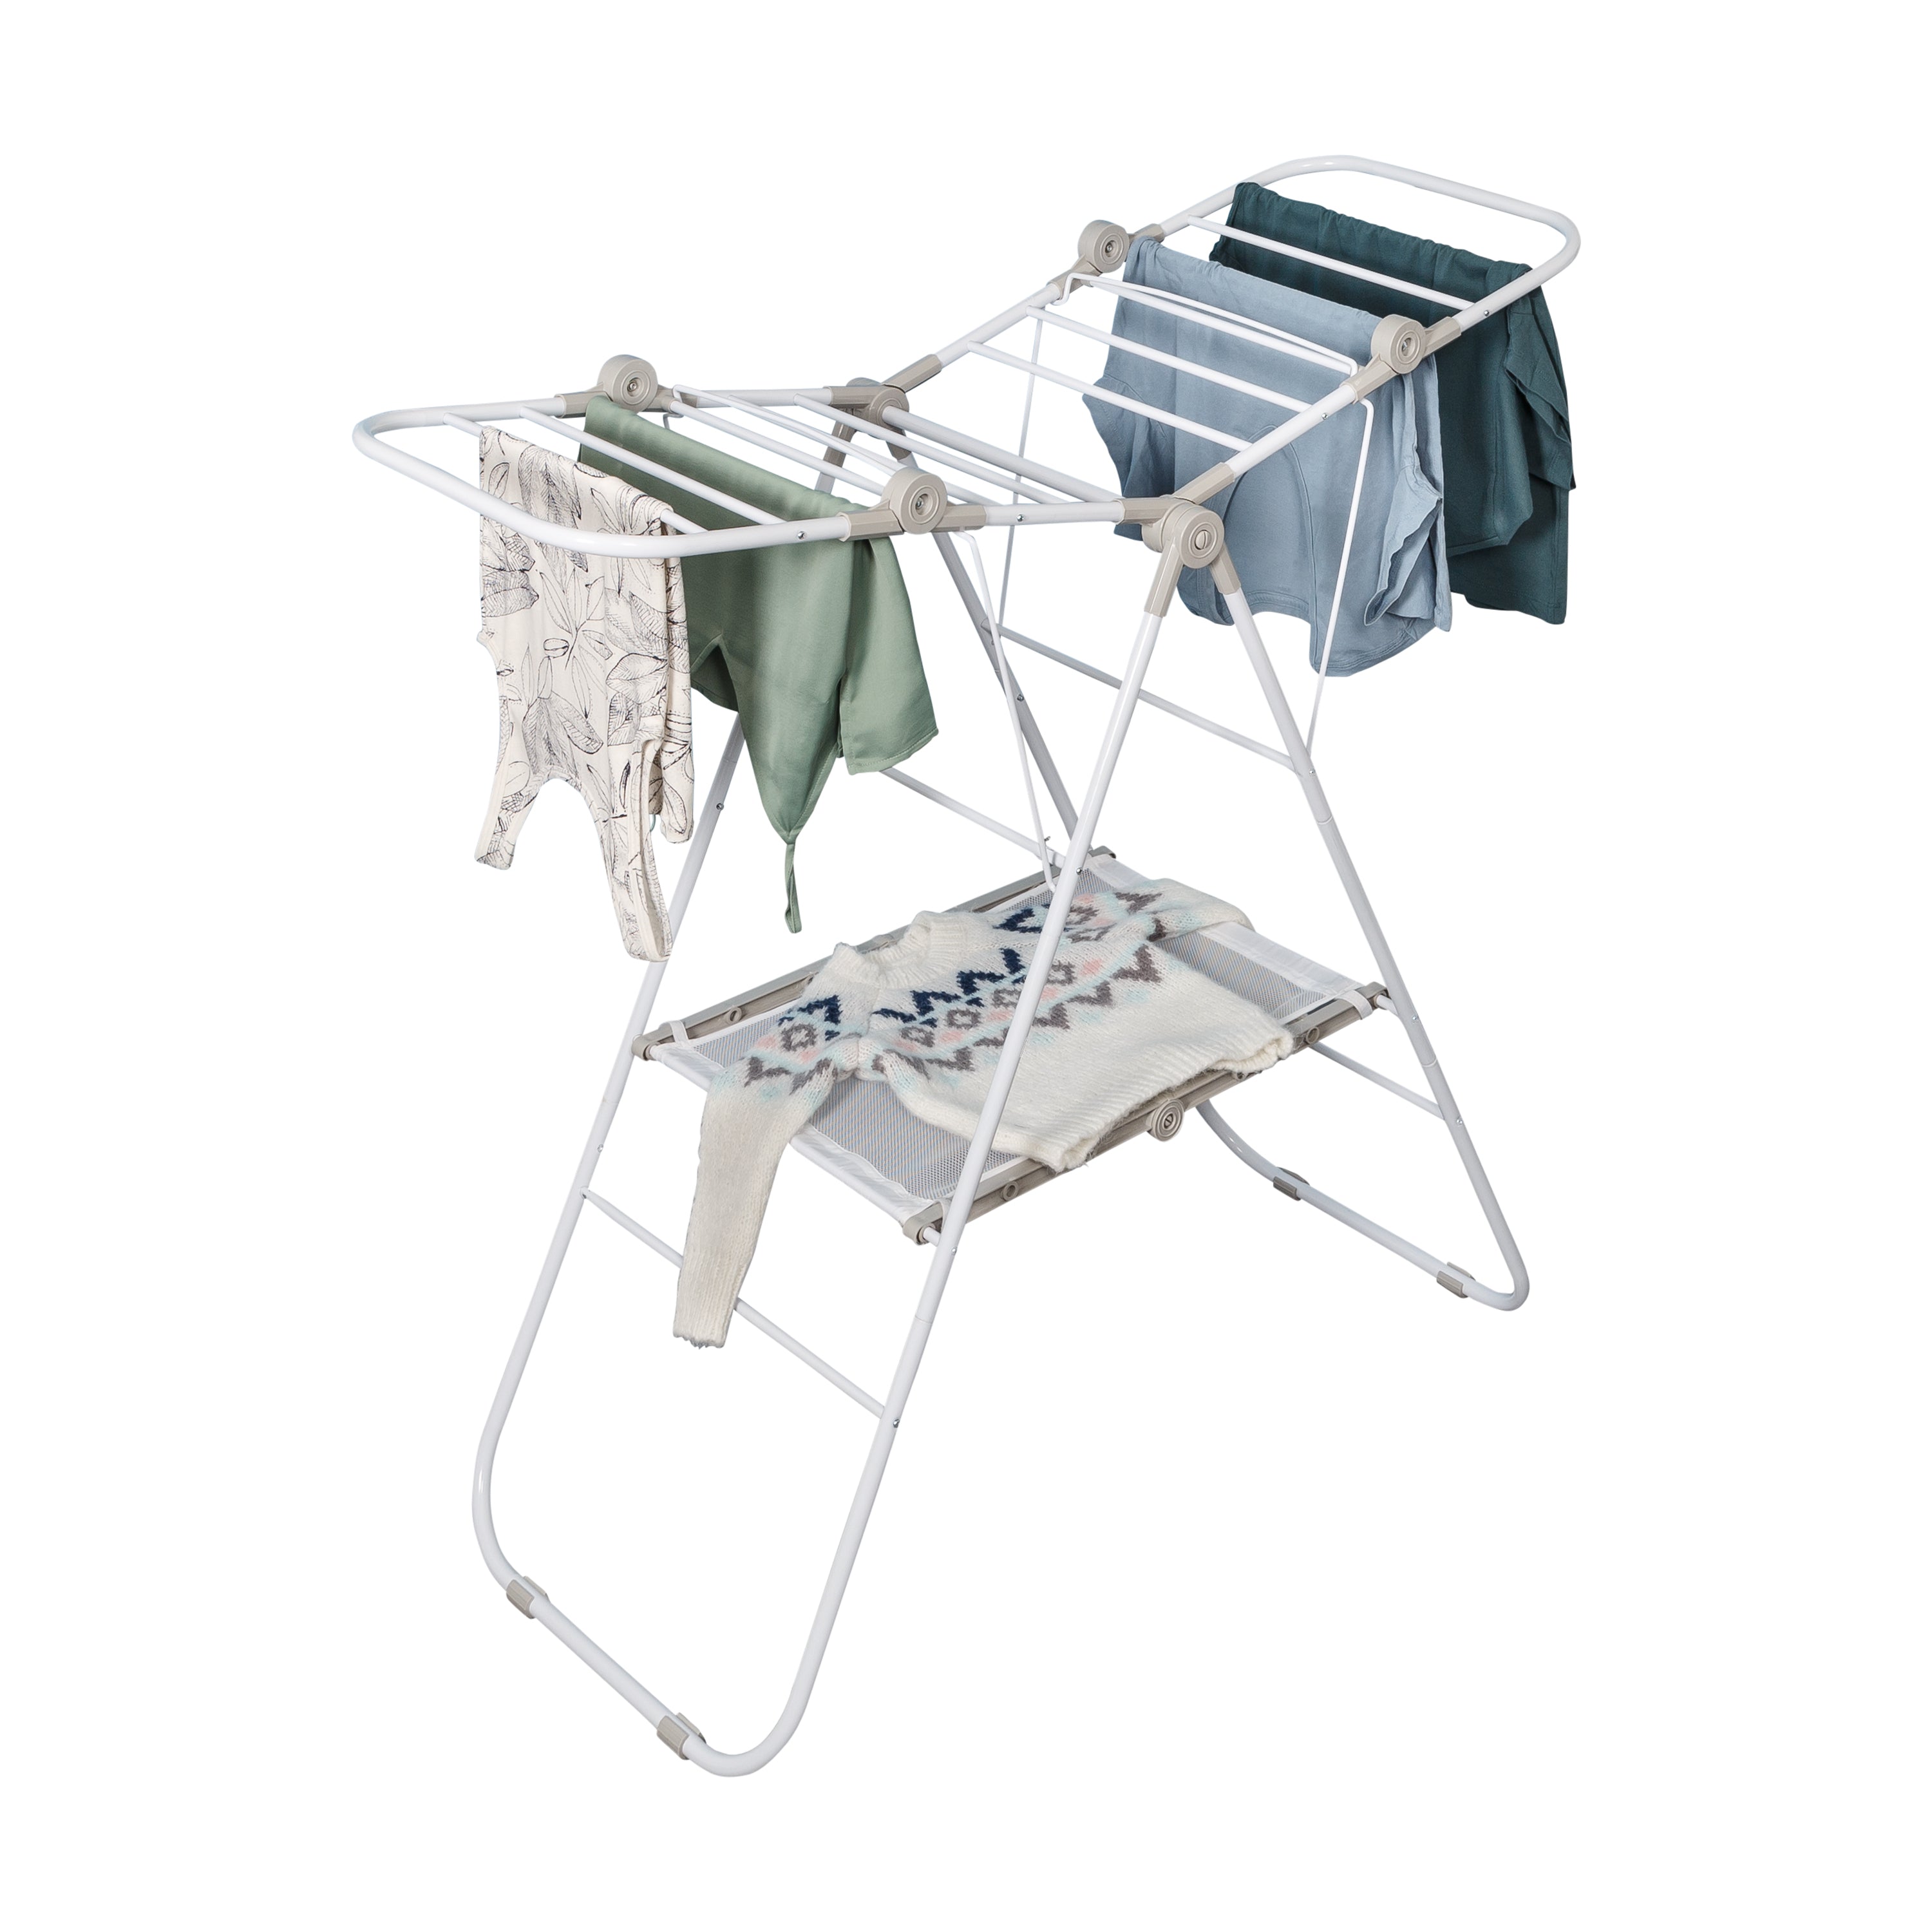 Honey-Can-Do Narrow Folding Wing Clothes Dryer White